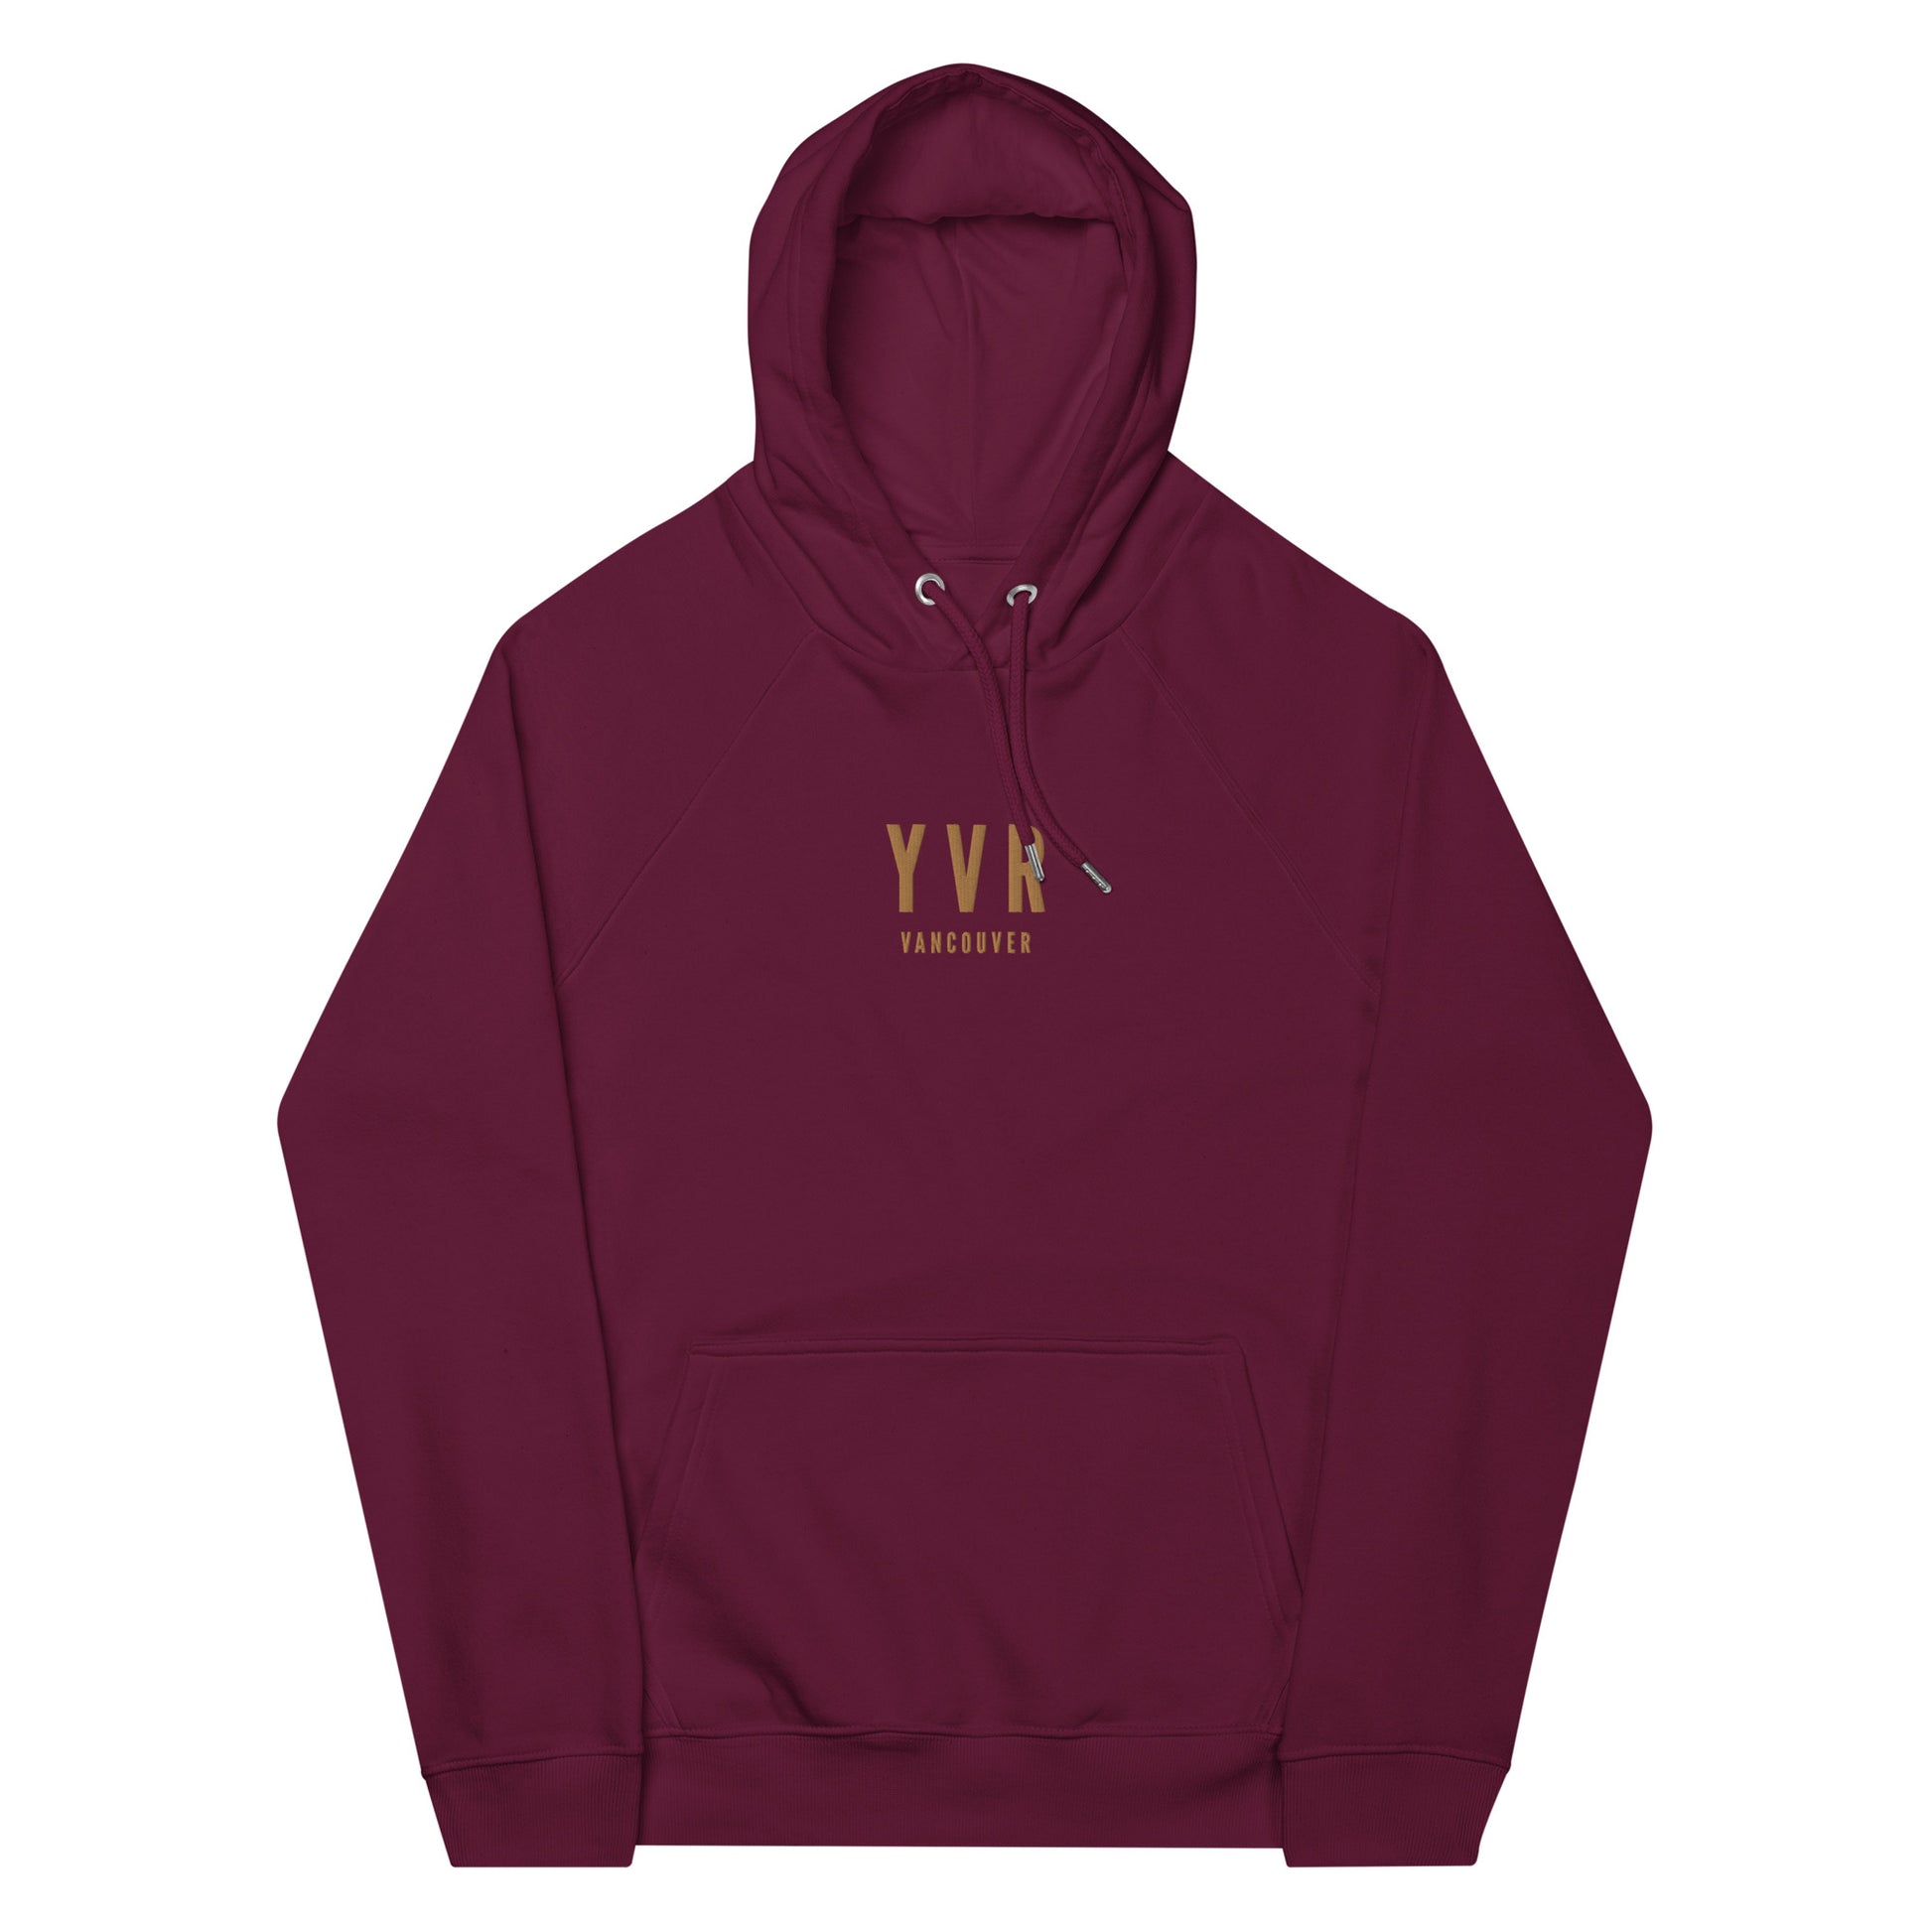 City Organic Hoodie - Old Gold • YVR Vancouver • YHM Designs - Image 11